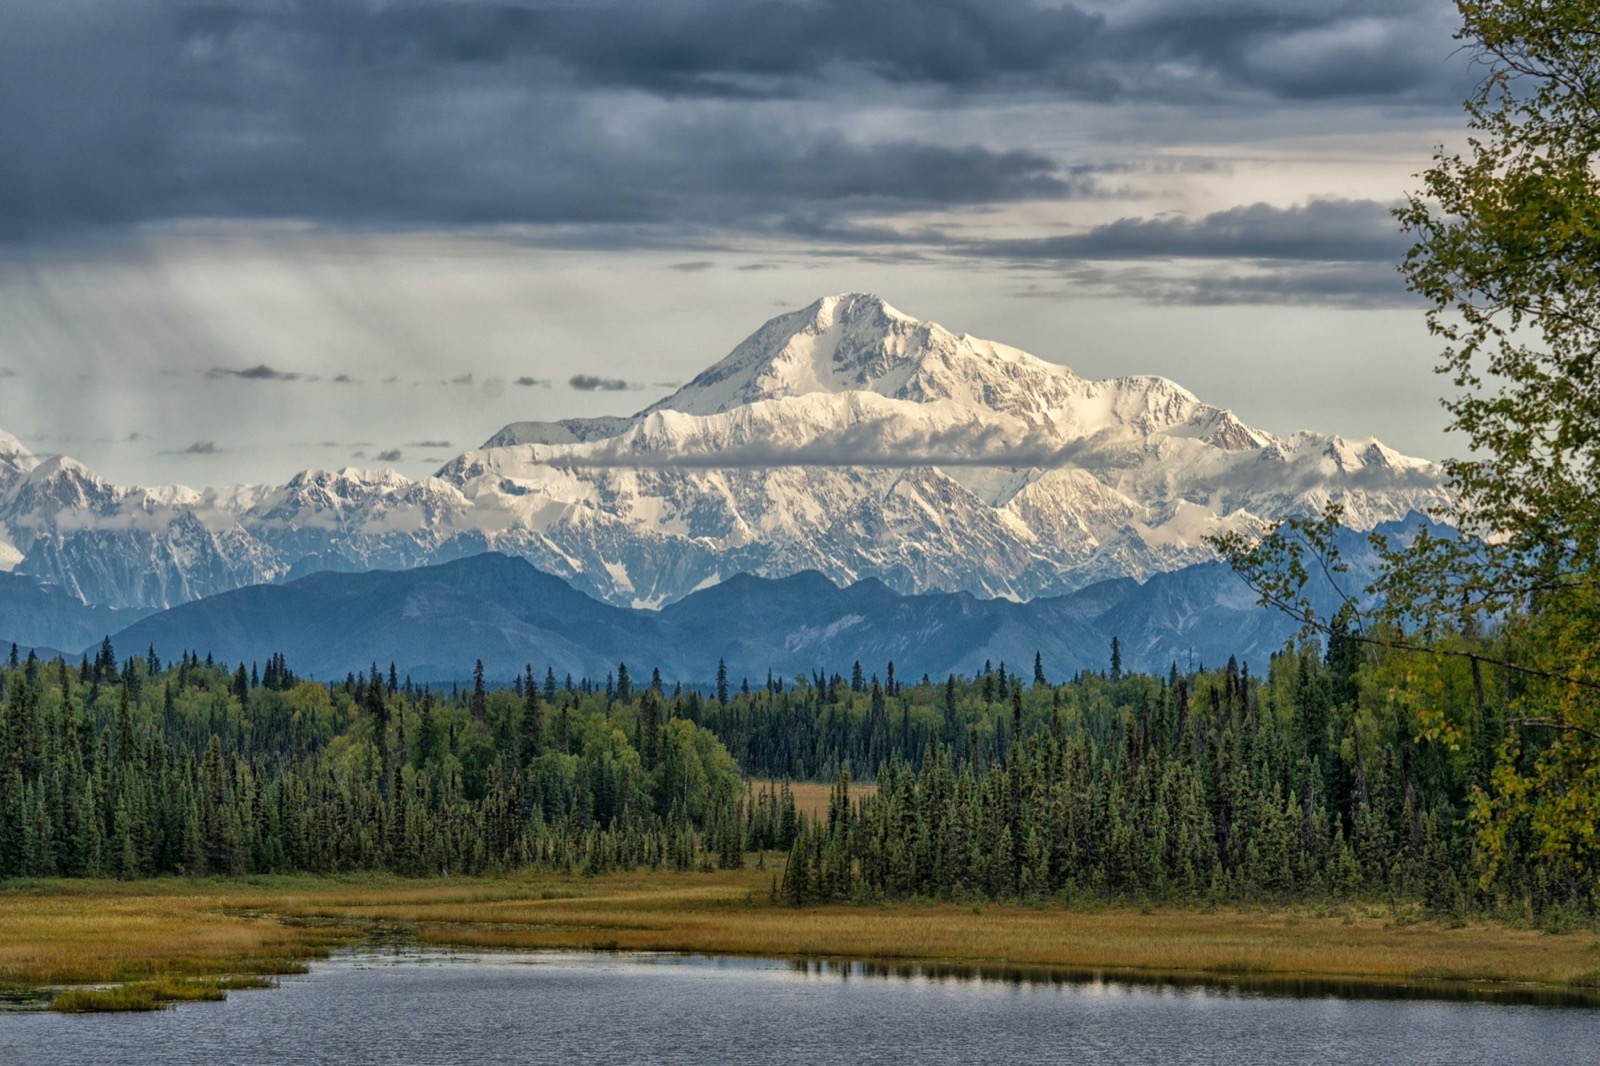 This 25-Question Mixed Trivia Quiz Was Made to Prevent You from Passing. Can You Beat the Odds? Mount Denali